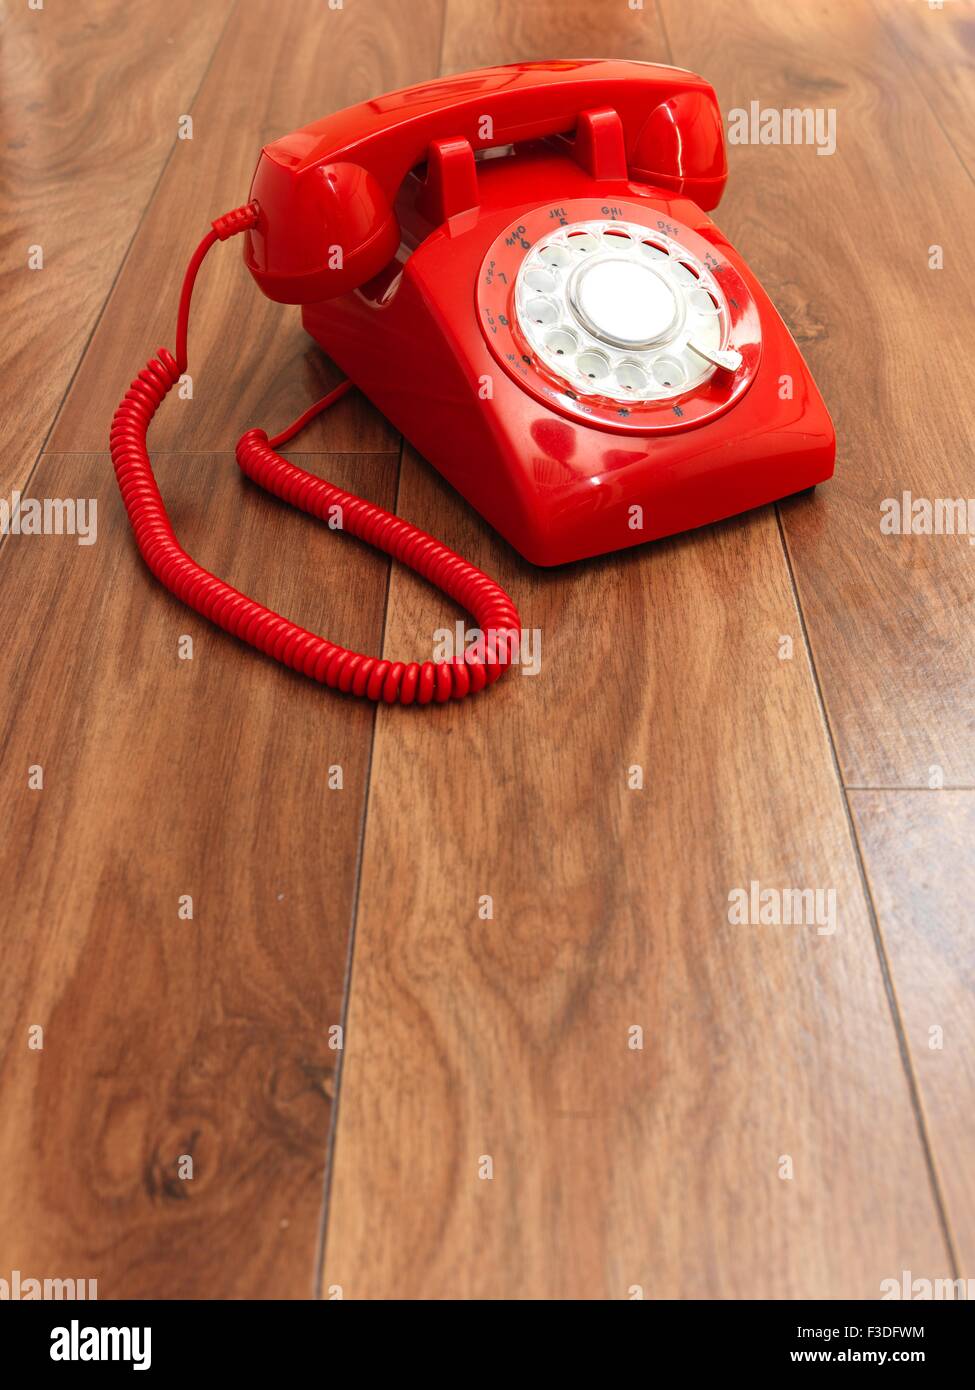 A close up photo of a red rotary phone Stock Photo